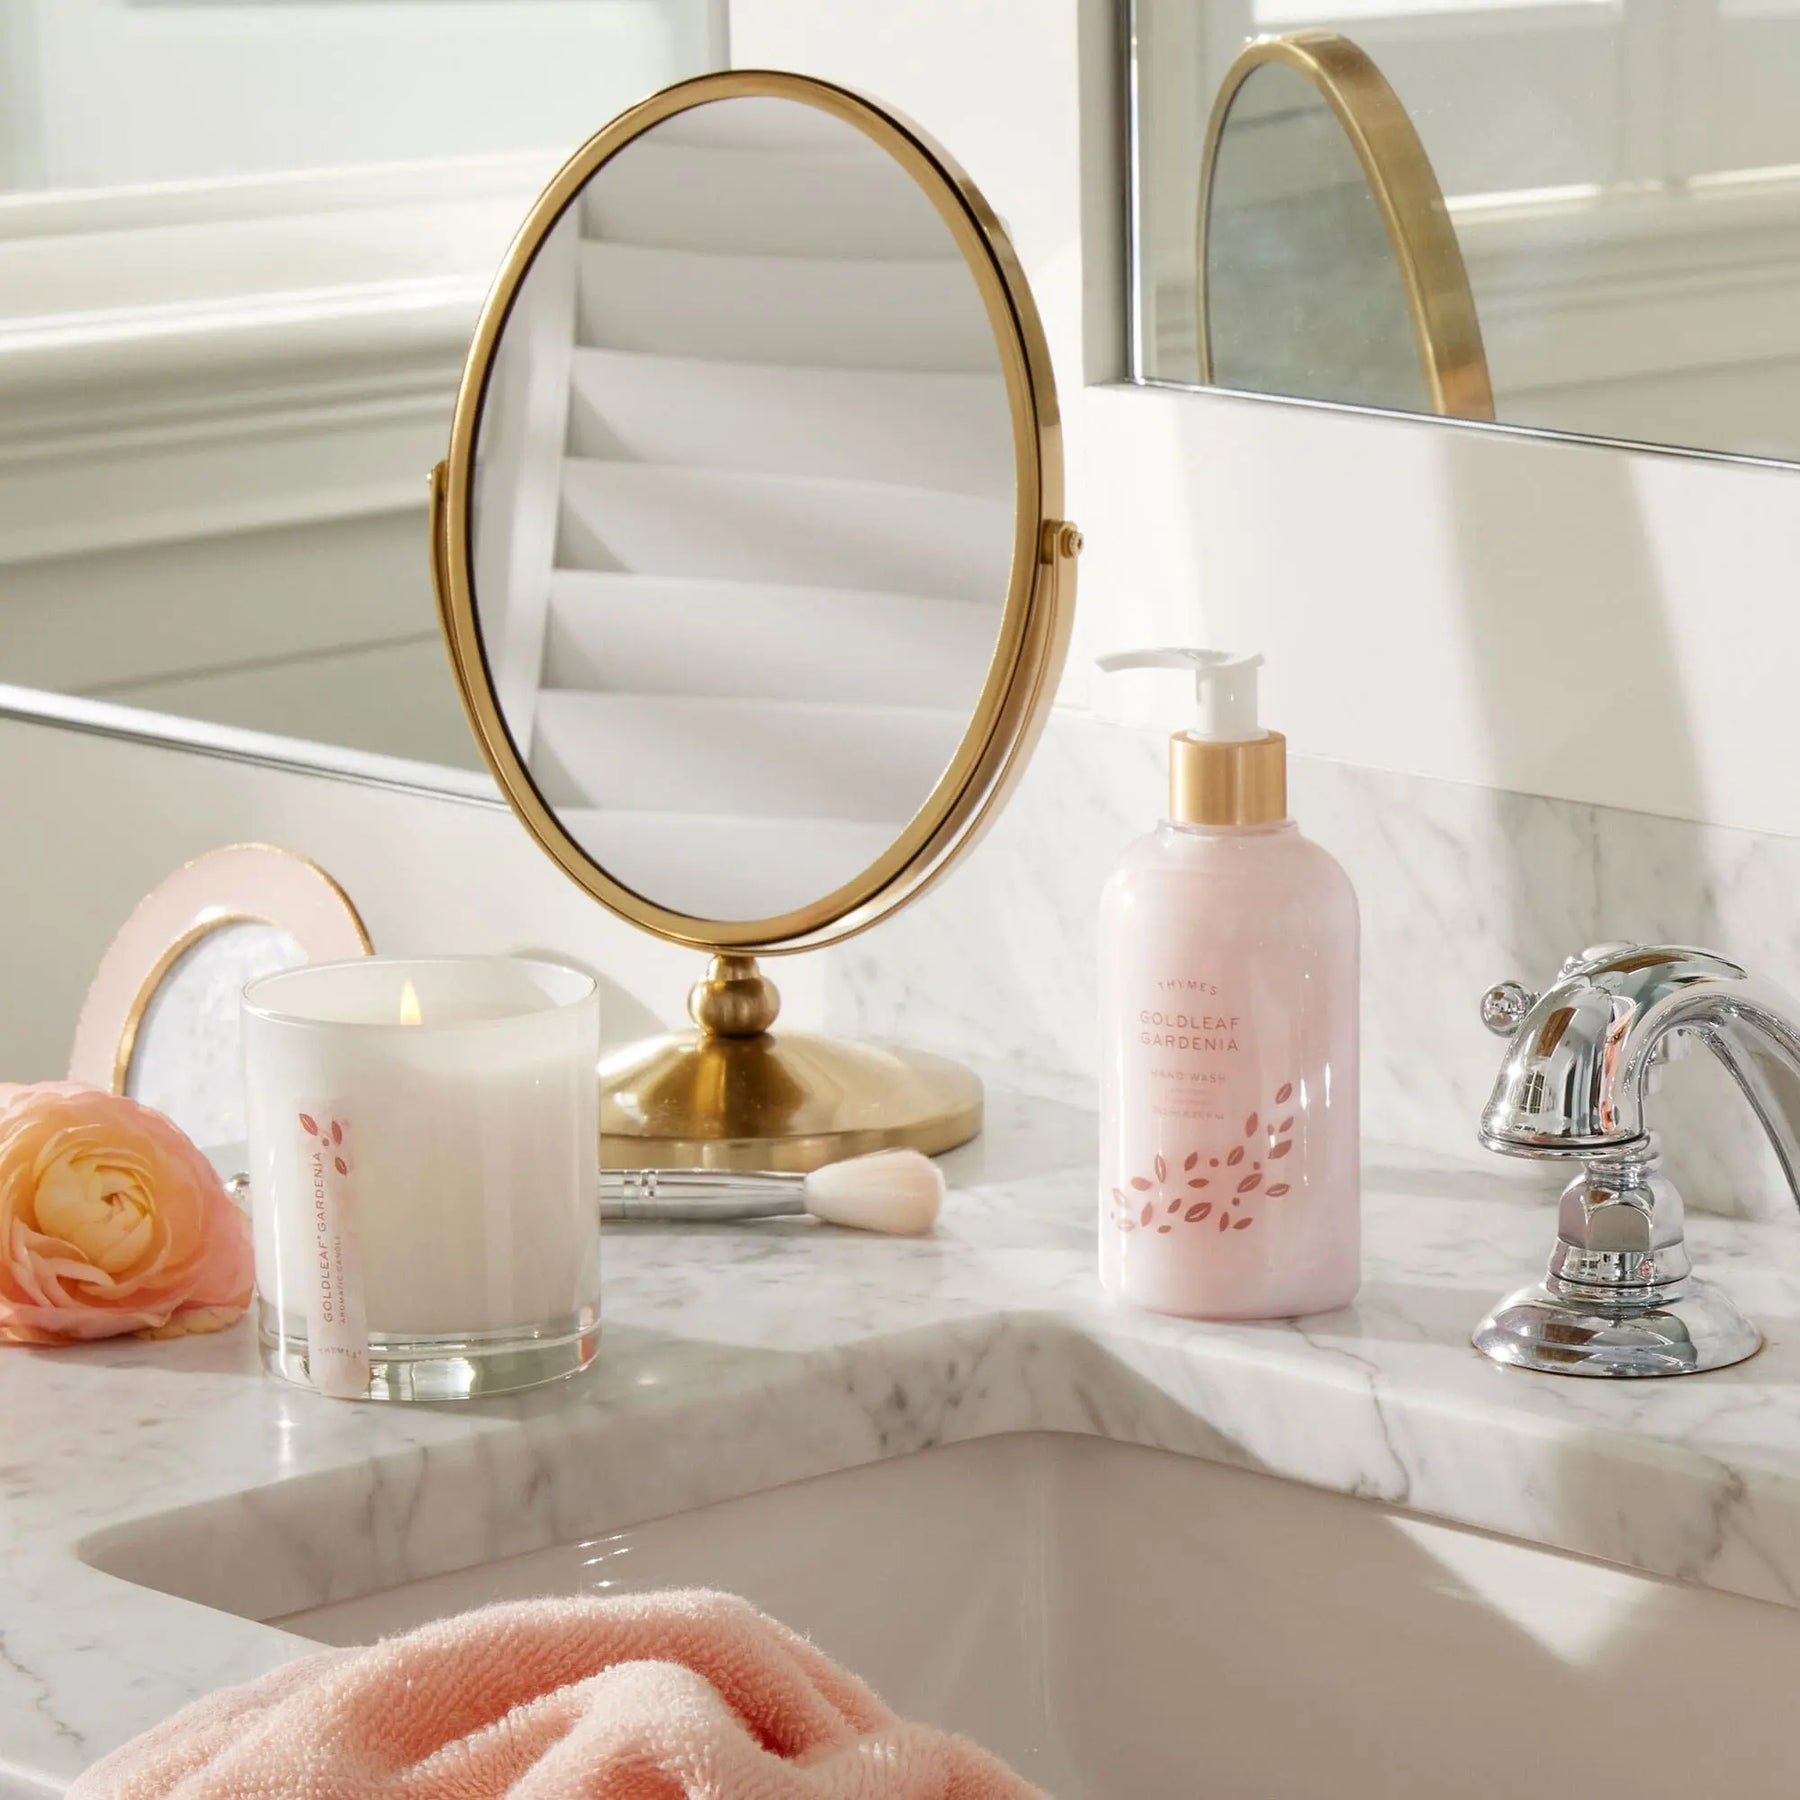 Thymes Goldleaf Gardenia Hand Wash Lave-mains Flussigsief 240 milliliter 8.25 fluid ounce in a bathroom by the sink